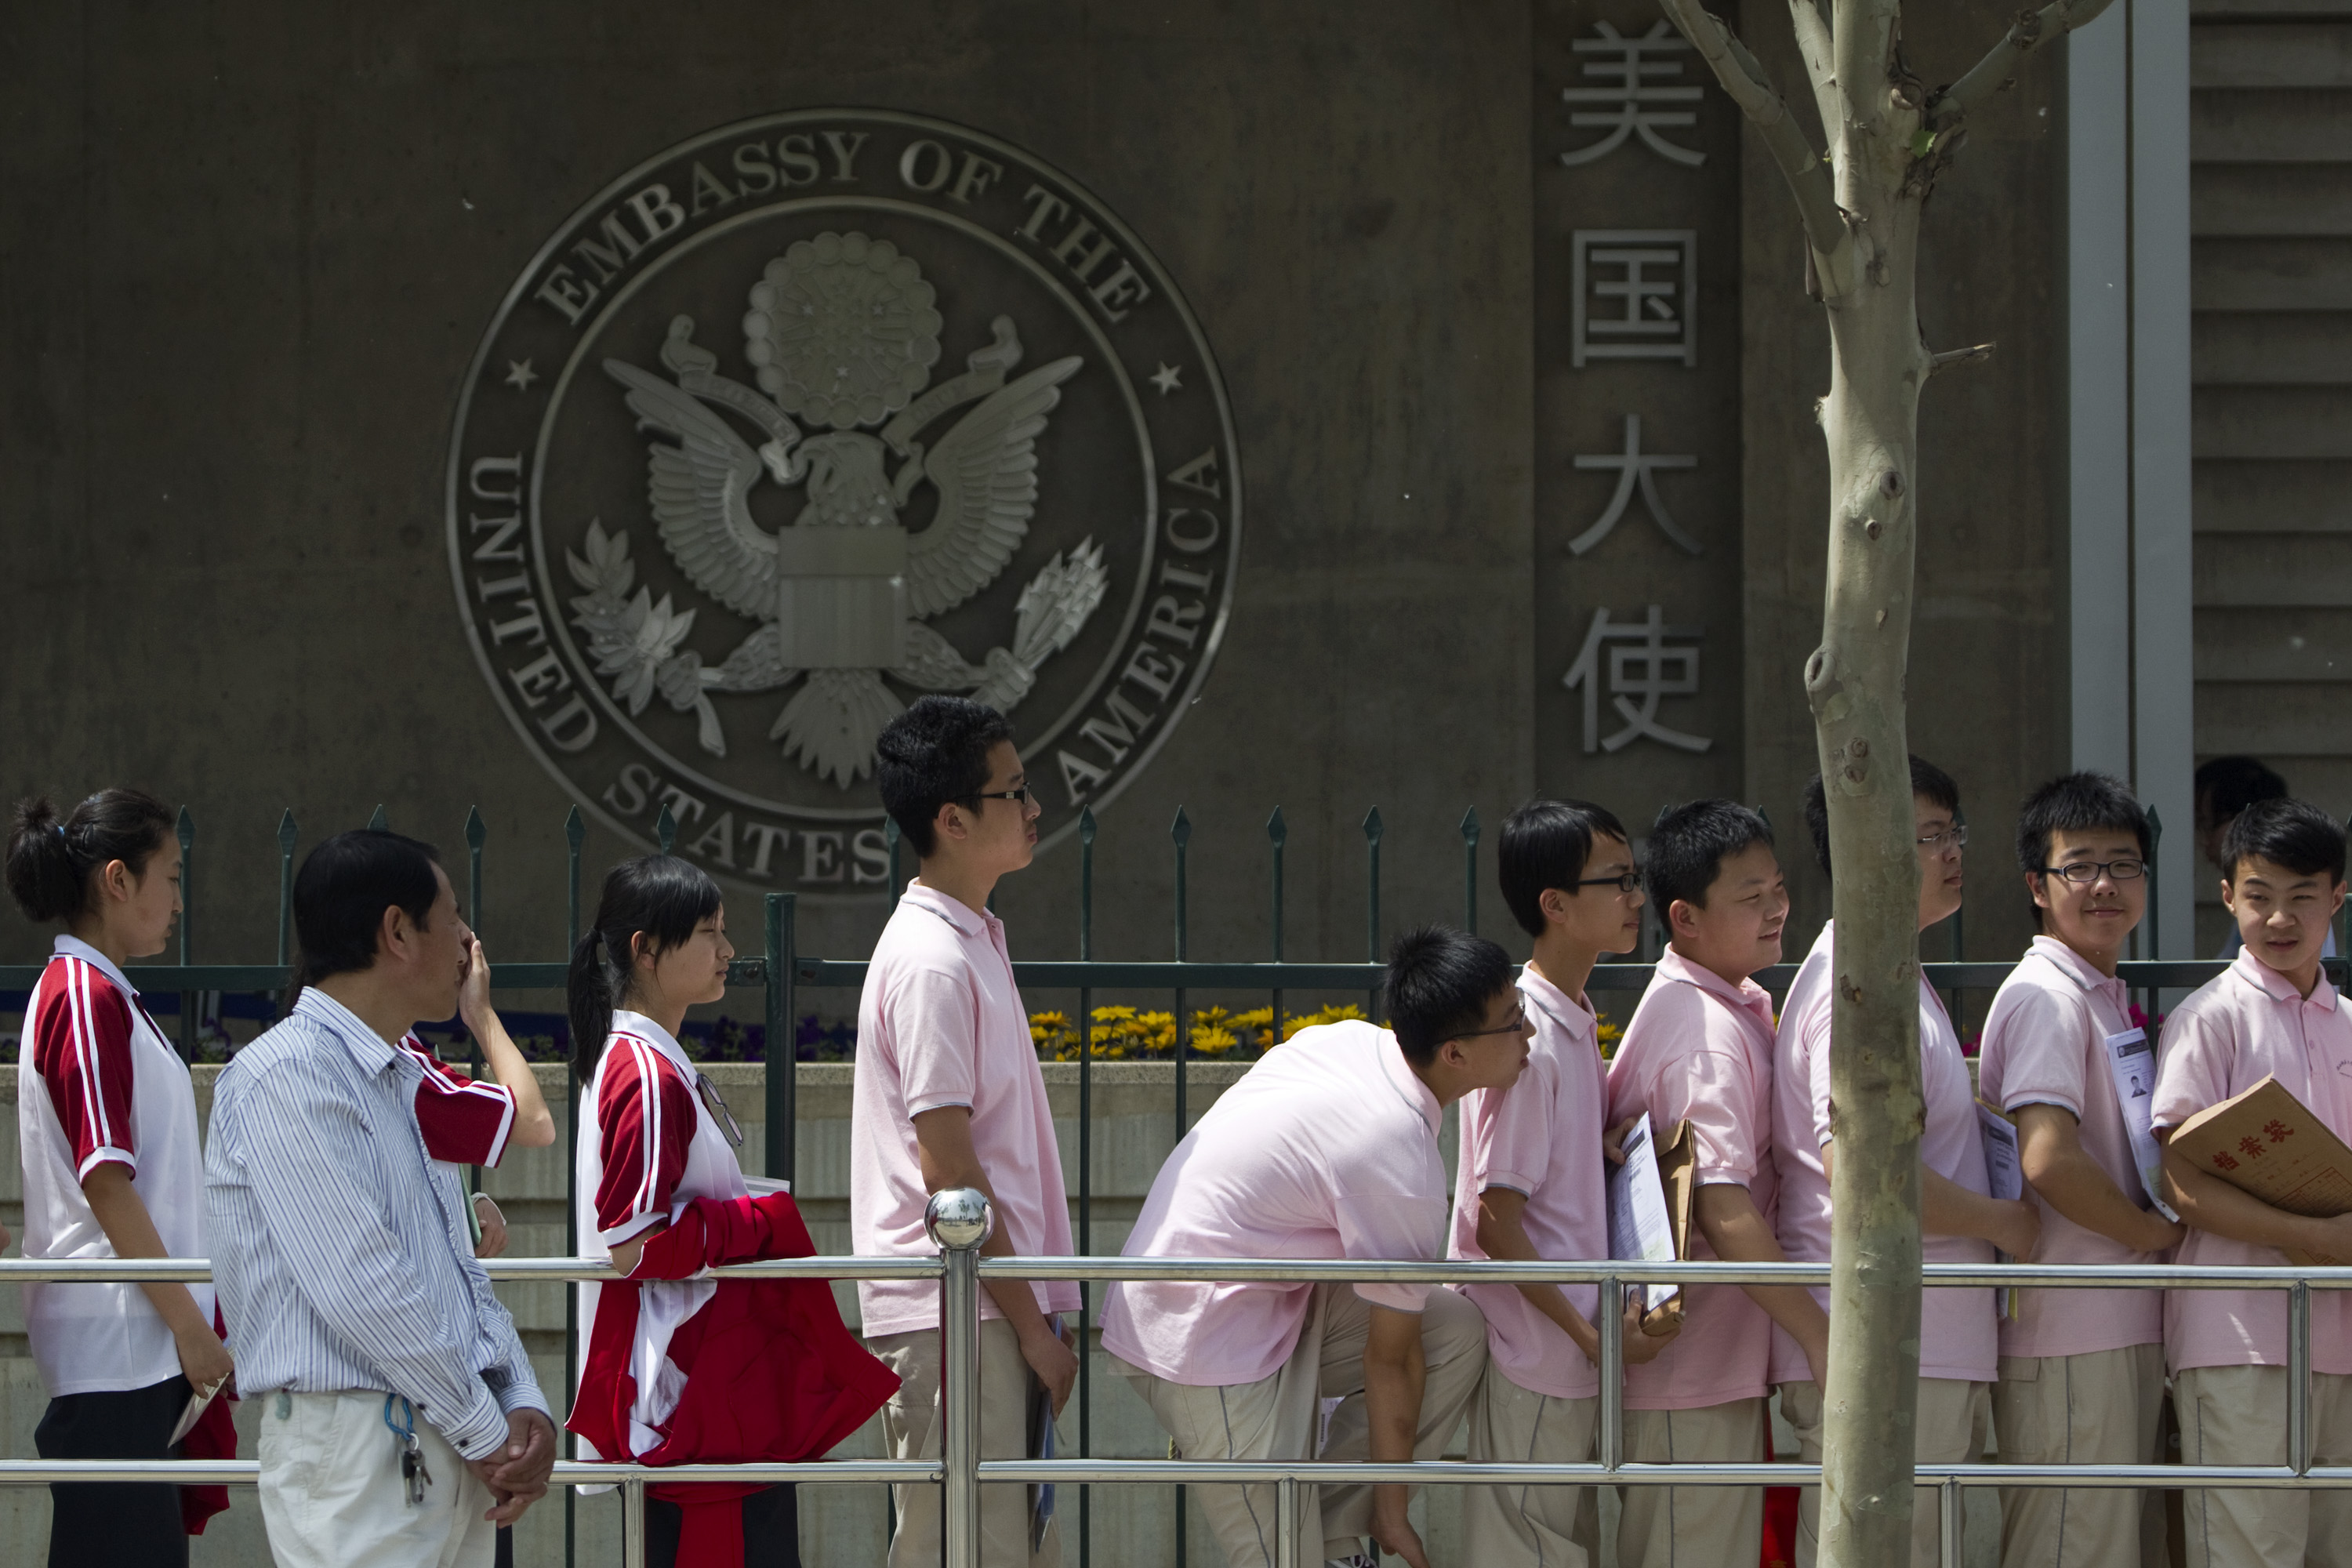 Most foreign exchange students in U.S. come from China